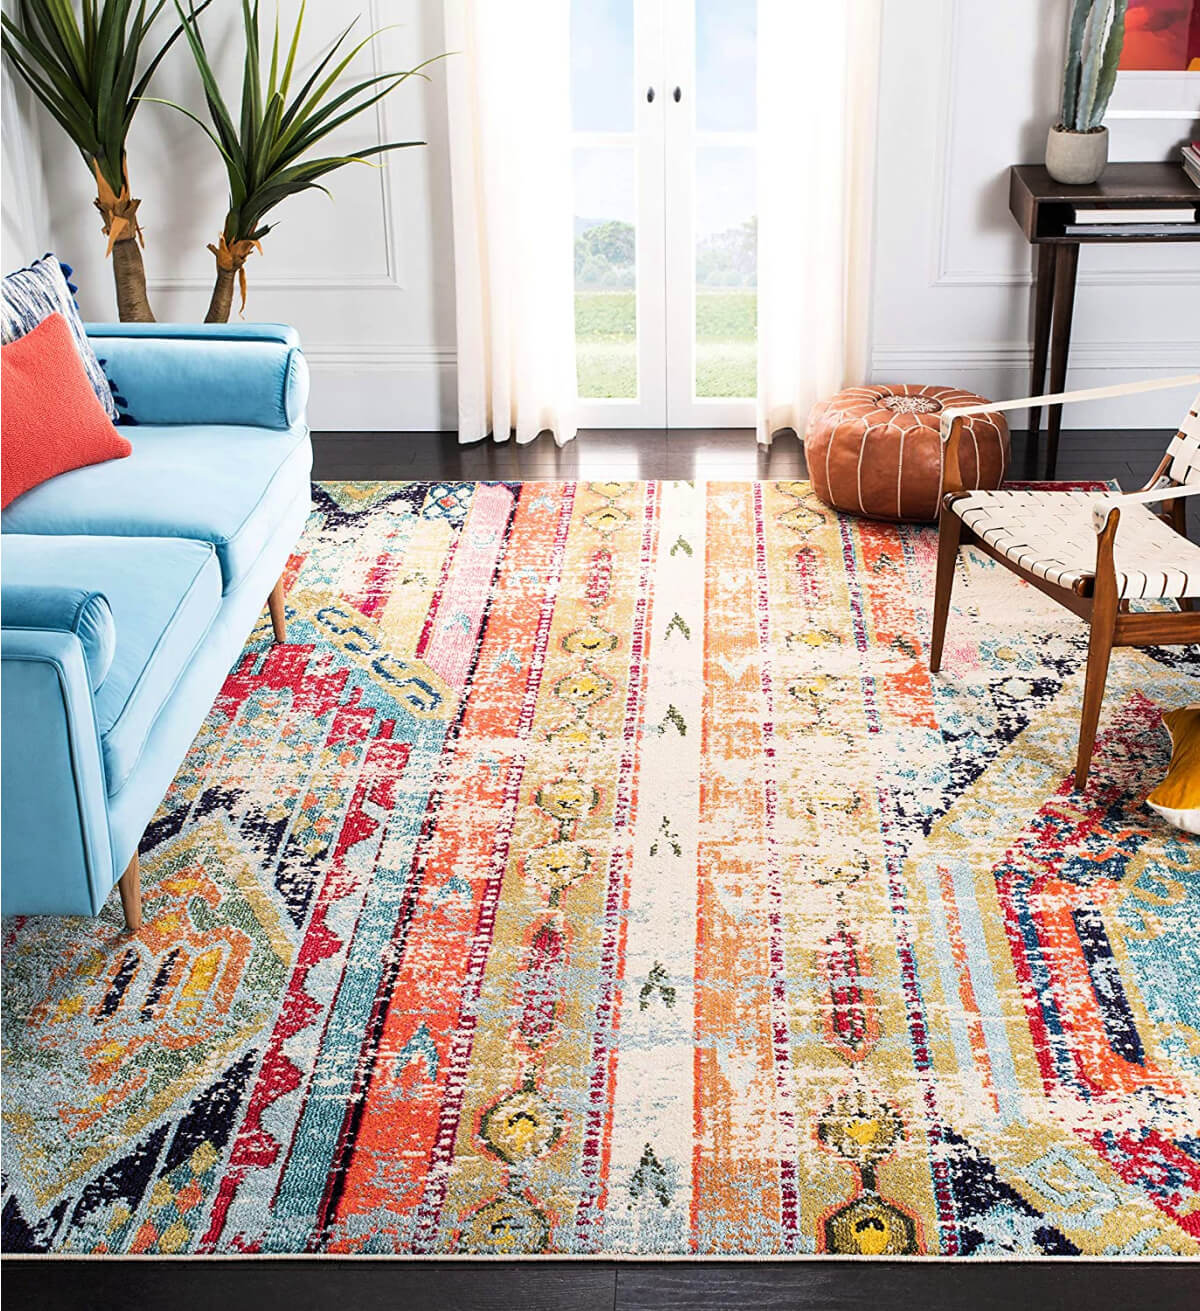 How To Choose An Area Rug